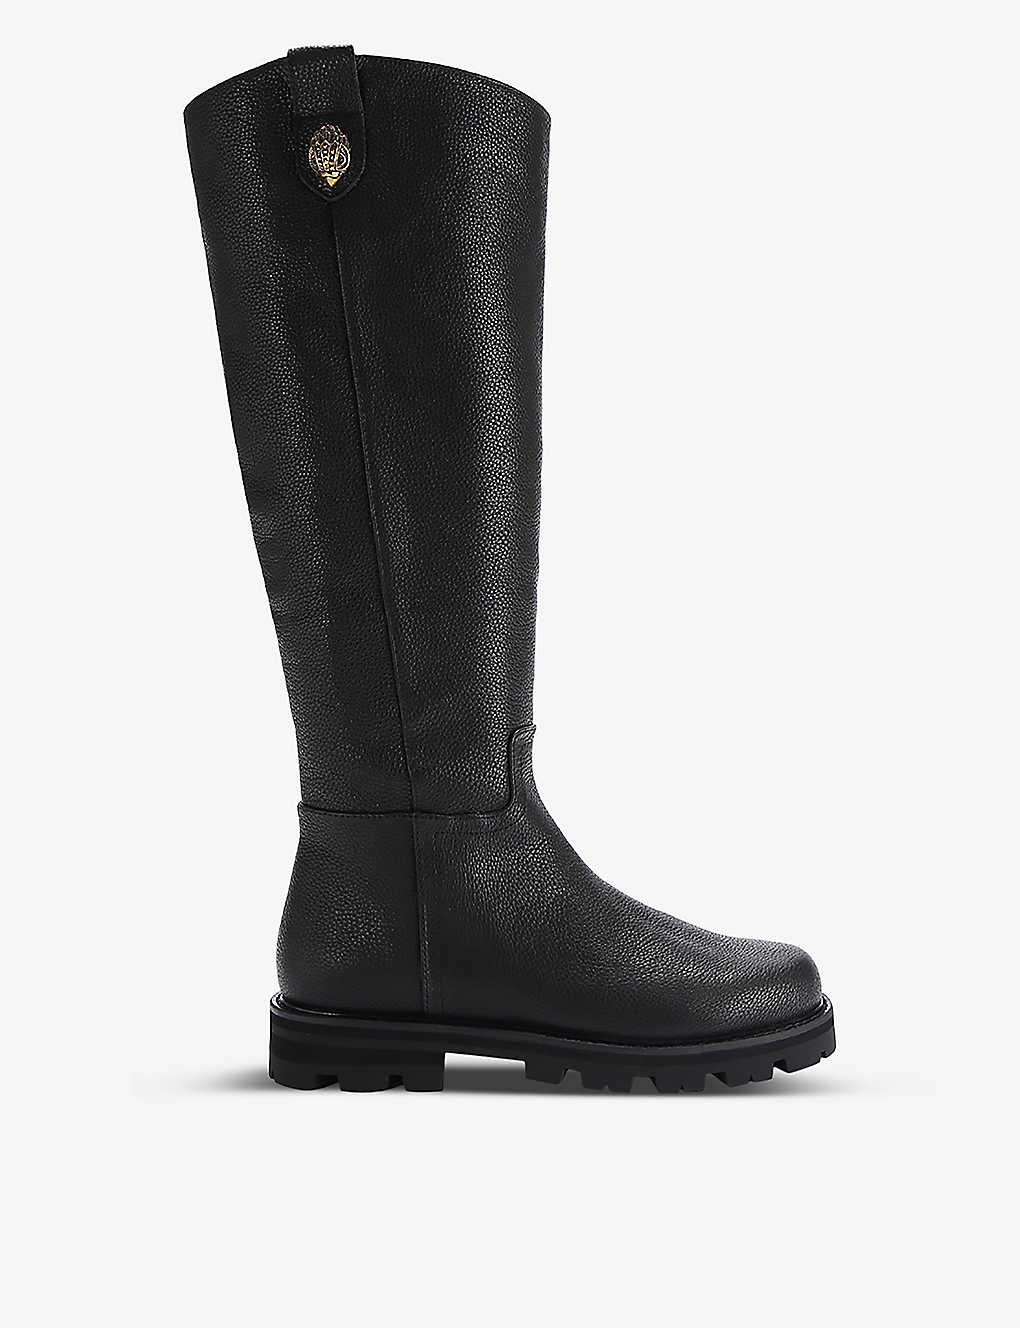 Kurt Geiger London Womens Black Carnaby Riding Eagle Head-embellished Leather Knee-high Boots